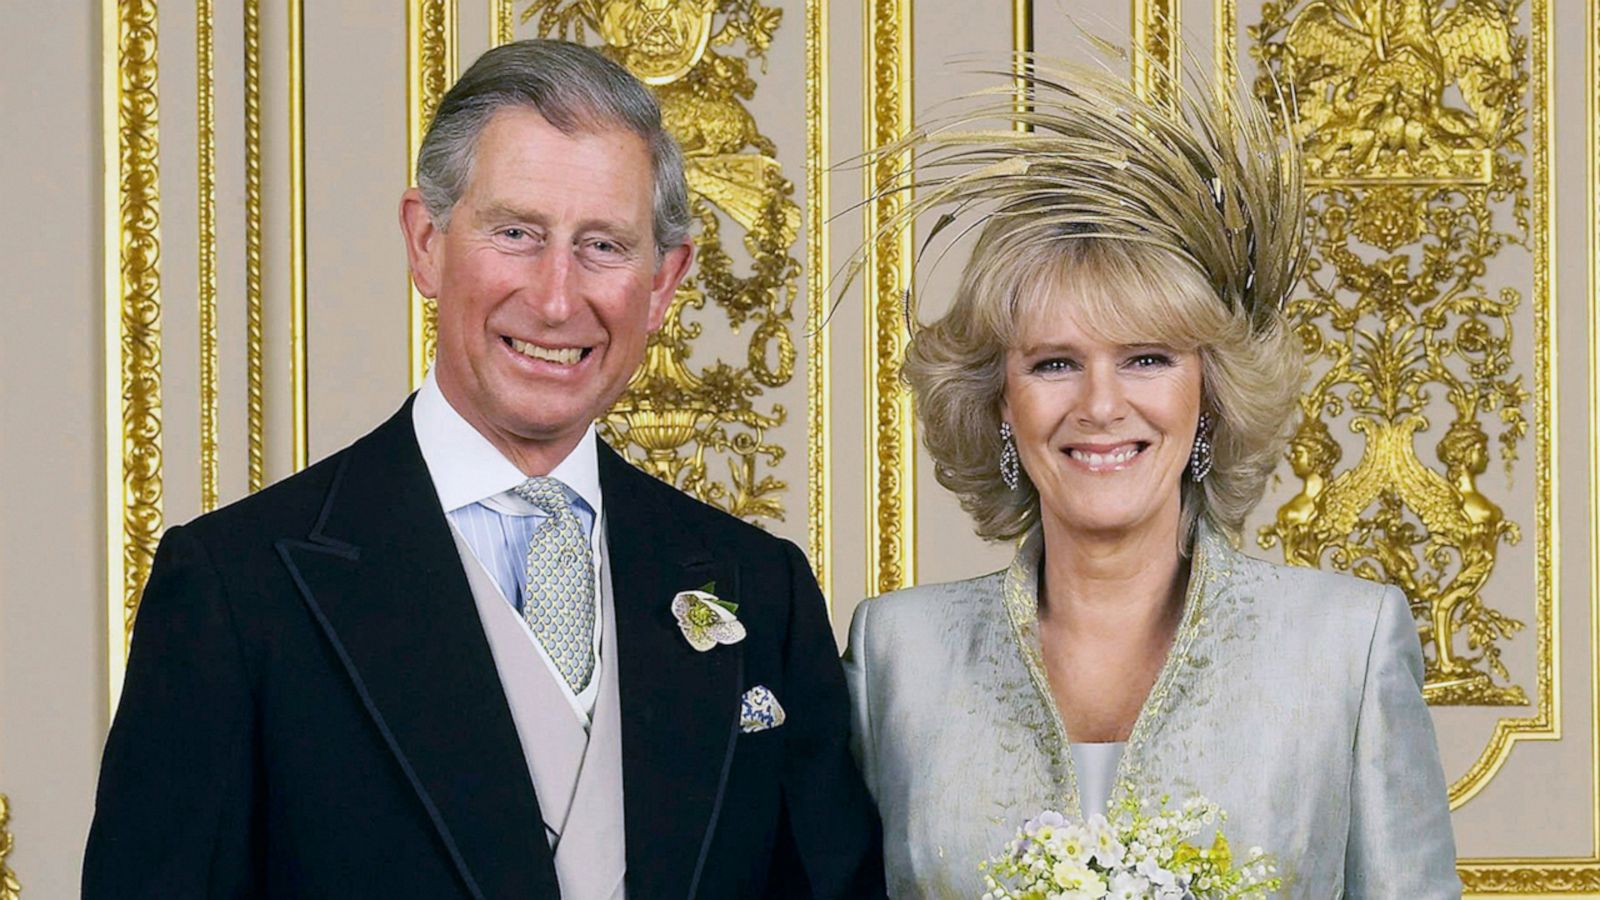 King Charles III and Queen Camilla, through the years